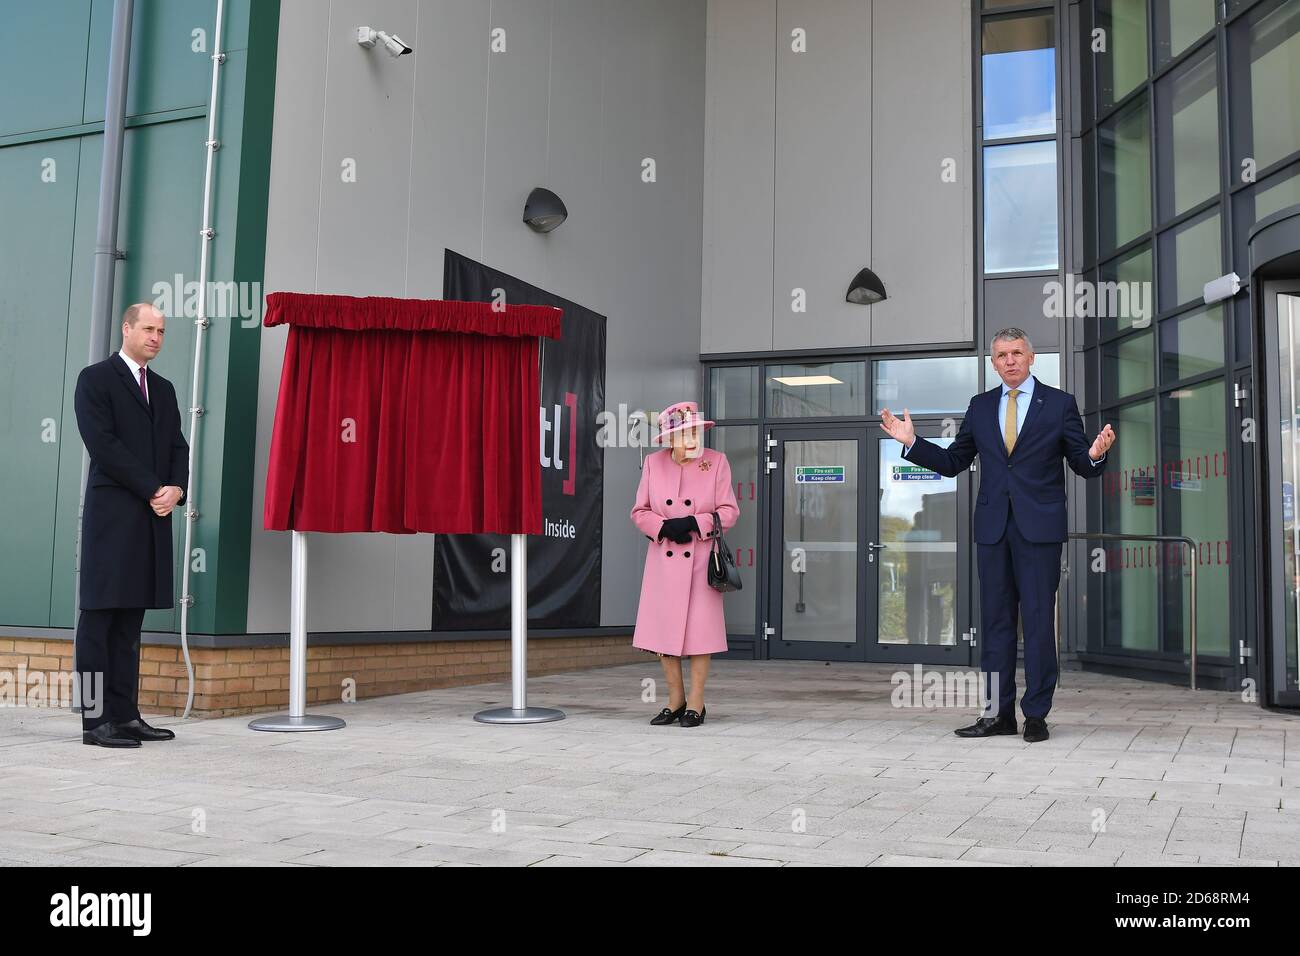 (left to right) The Duke of Cambridge, Queen Elizabeth II and Chief Executive Gary Aitkenhead ahead of the unveiling of a plaque to officially open the new Energetics Analysis Centre at the Defence Science and Technology Laboratory (DSTL) at Porton Down, Wiltshire. Stock Photo